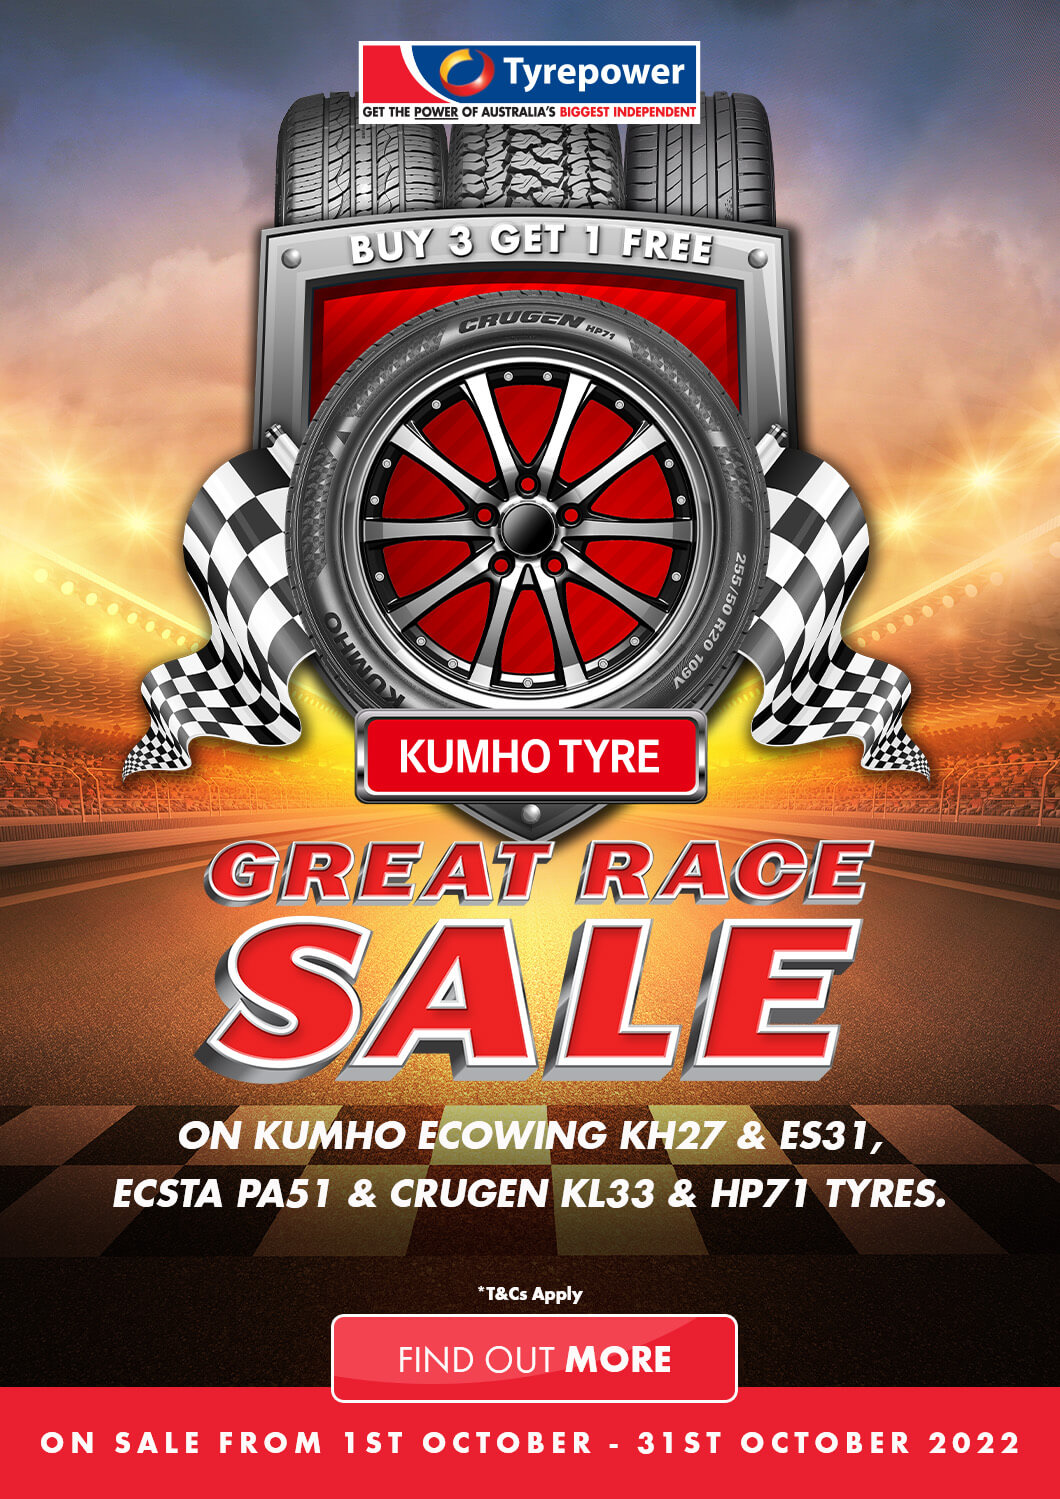 Buy 3 Get 1 Free on Kumho Ecowing KH27, Ecsta PA51, Crugen KL33 & HP71 Tyres.